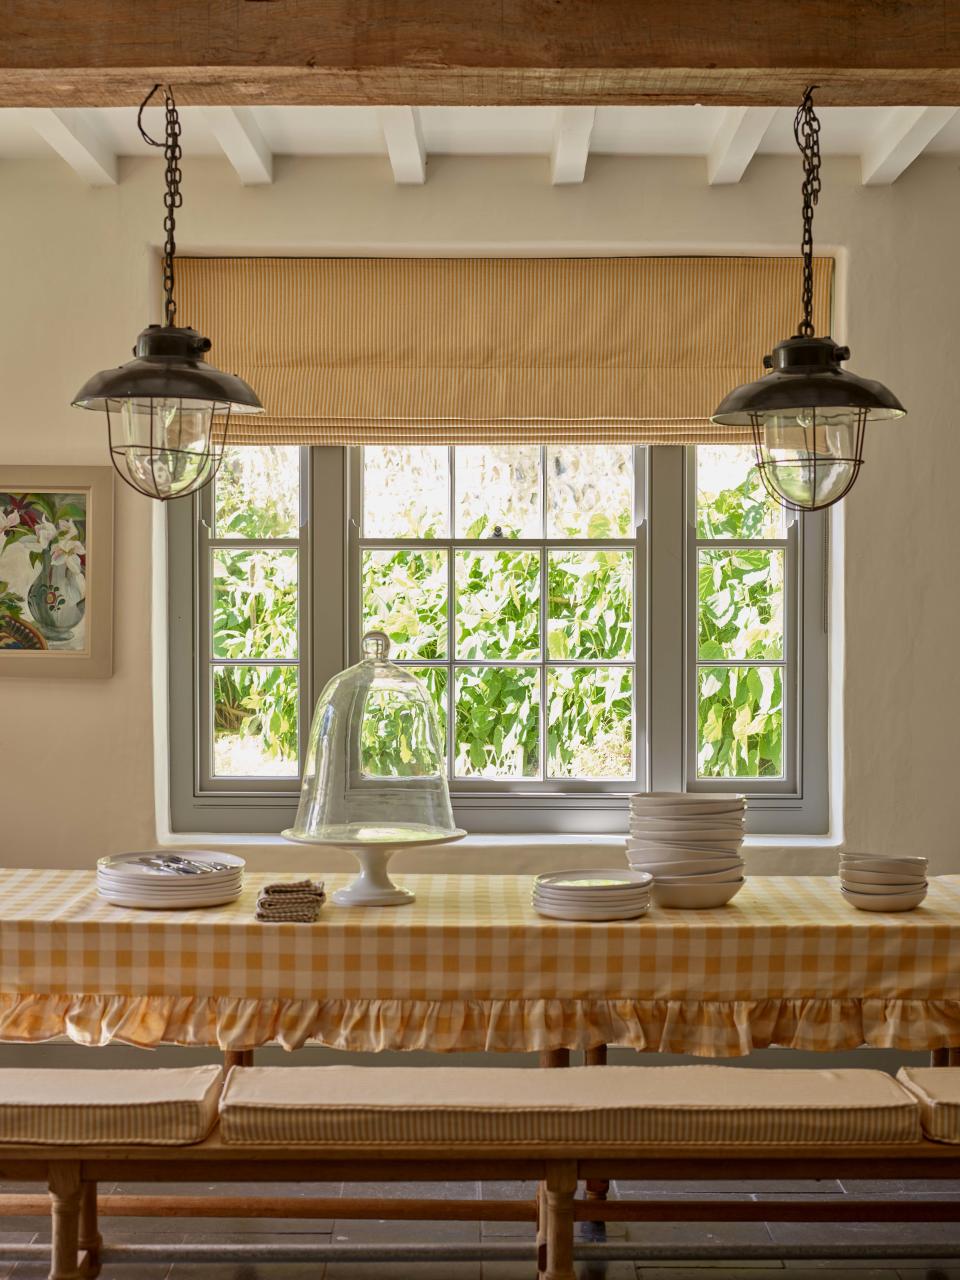 6. Put the focus on the smaller details in a dining room